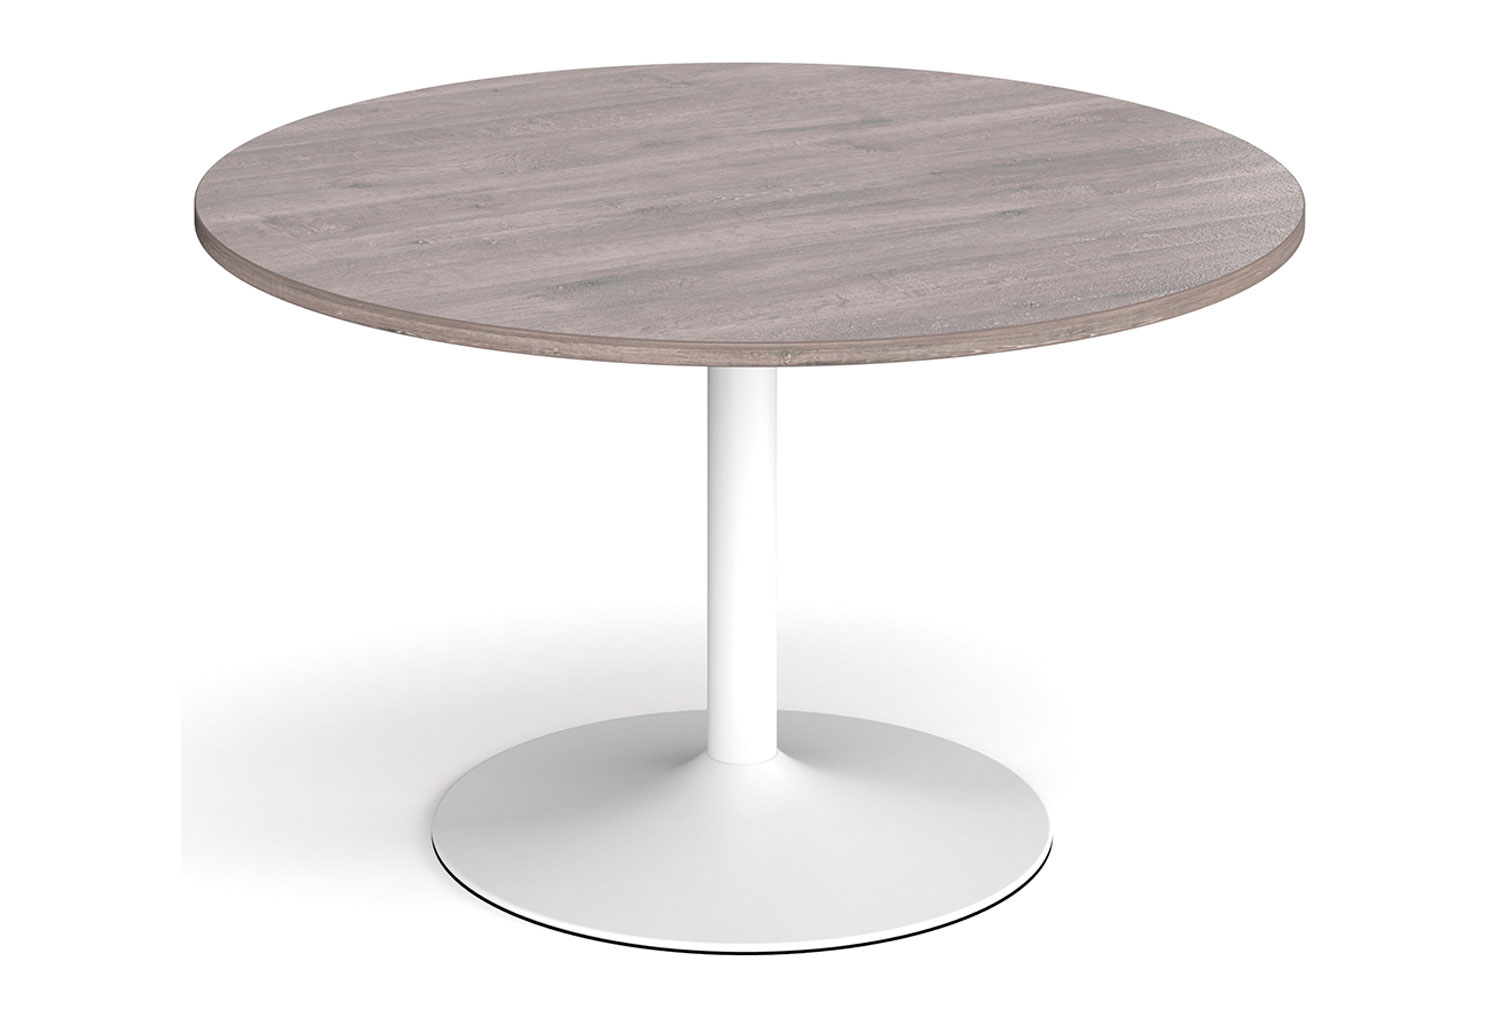 Trumpet Base Circular Boardroom Table, 120diax73h (cm), White Frame, Grey Oak, Fully Installed